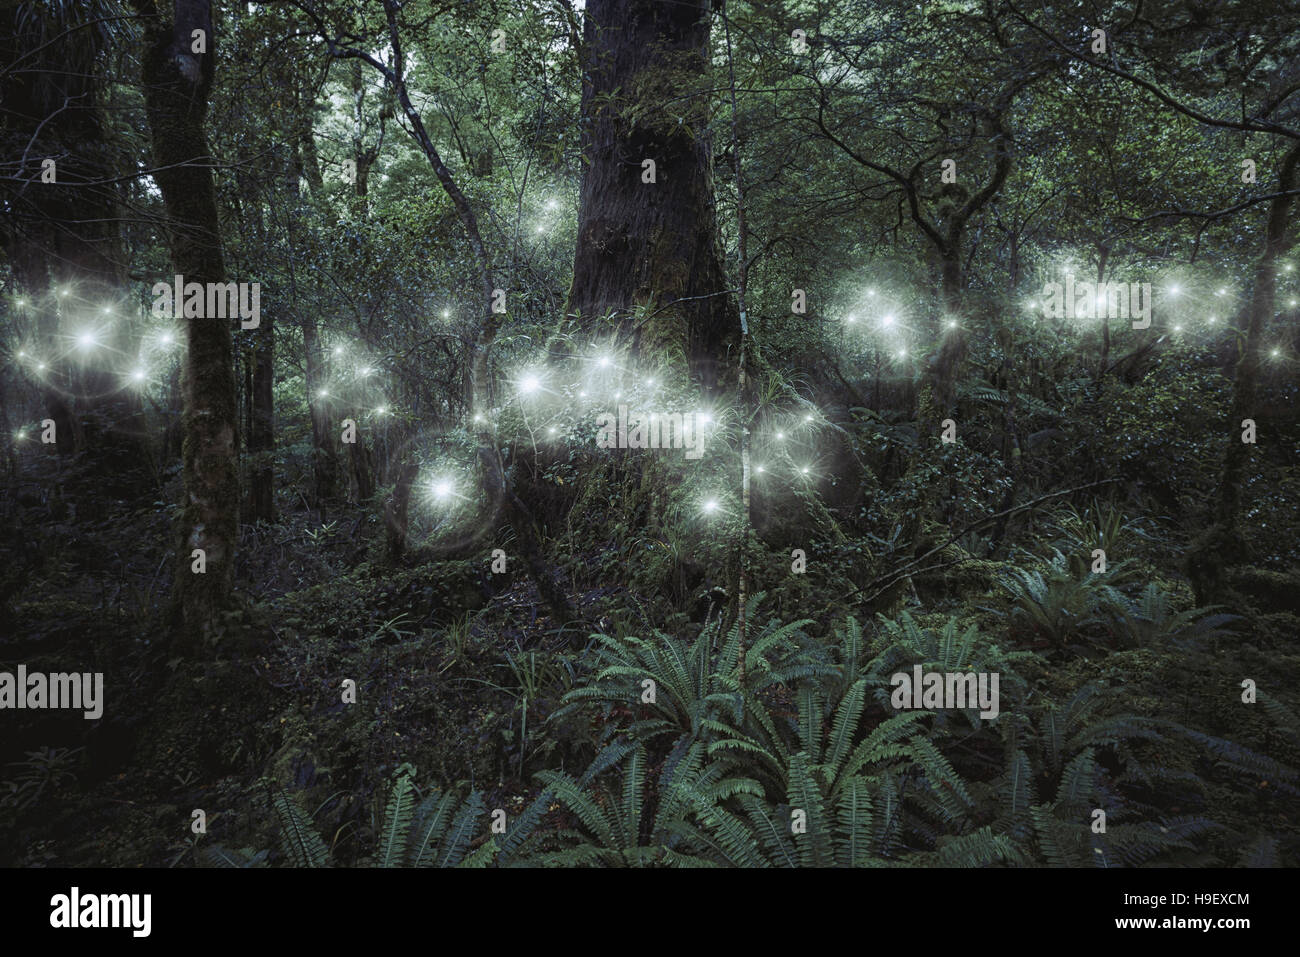 Glowing spheres hovering in forest Stock Photo